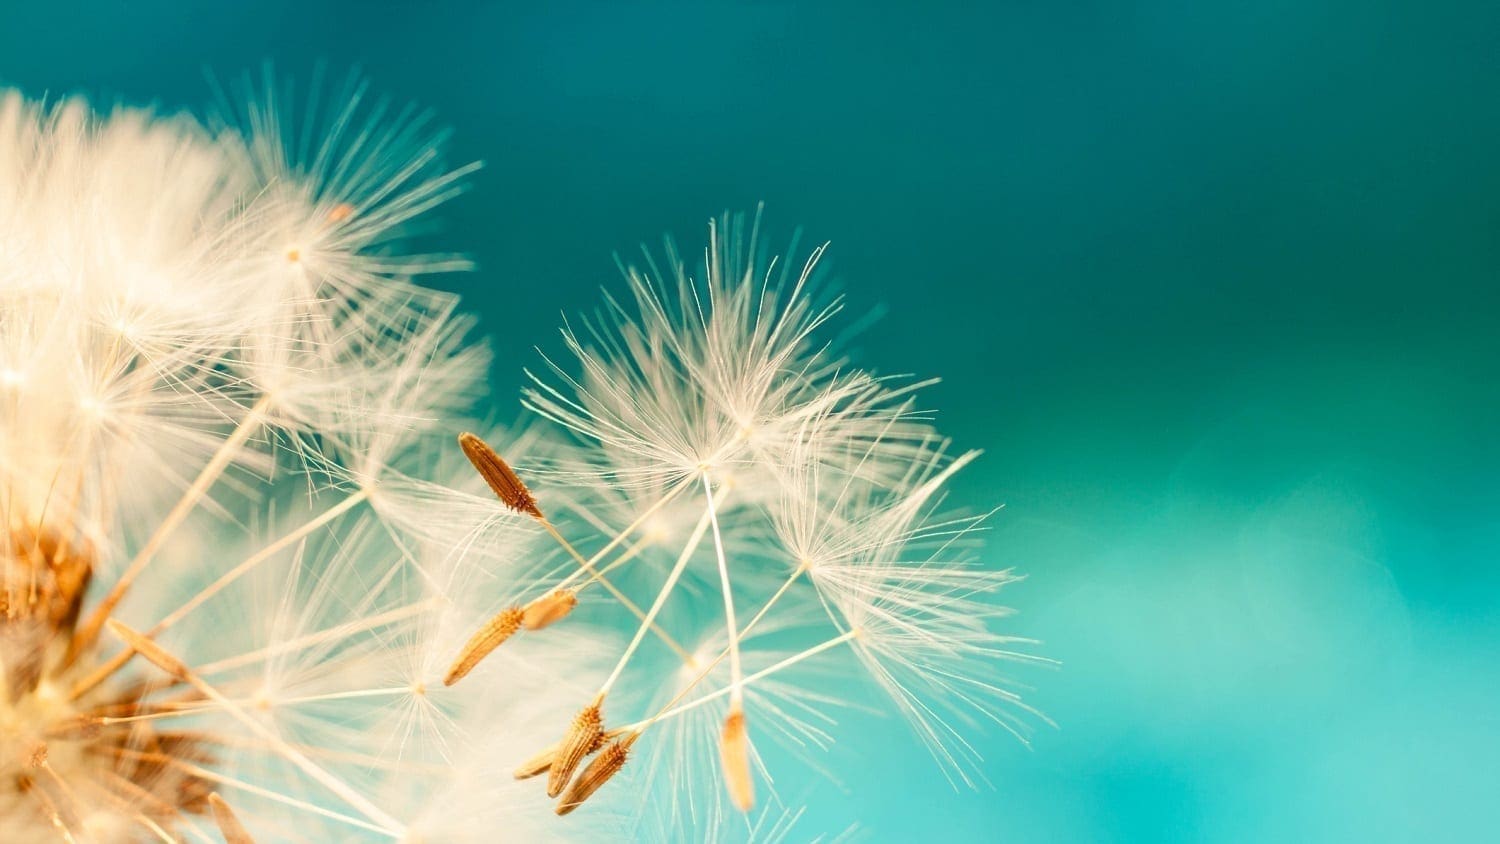 Dandelion seeds blowing from a seed head: Photo 118689372 © Ana Prego | Dreamstime.com